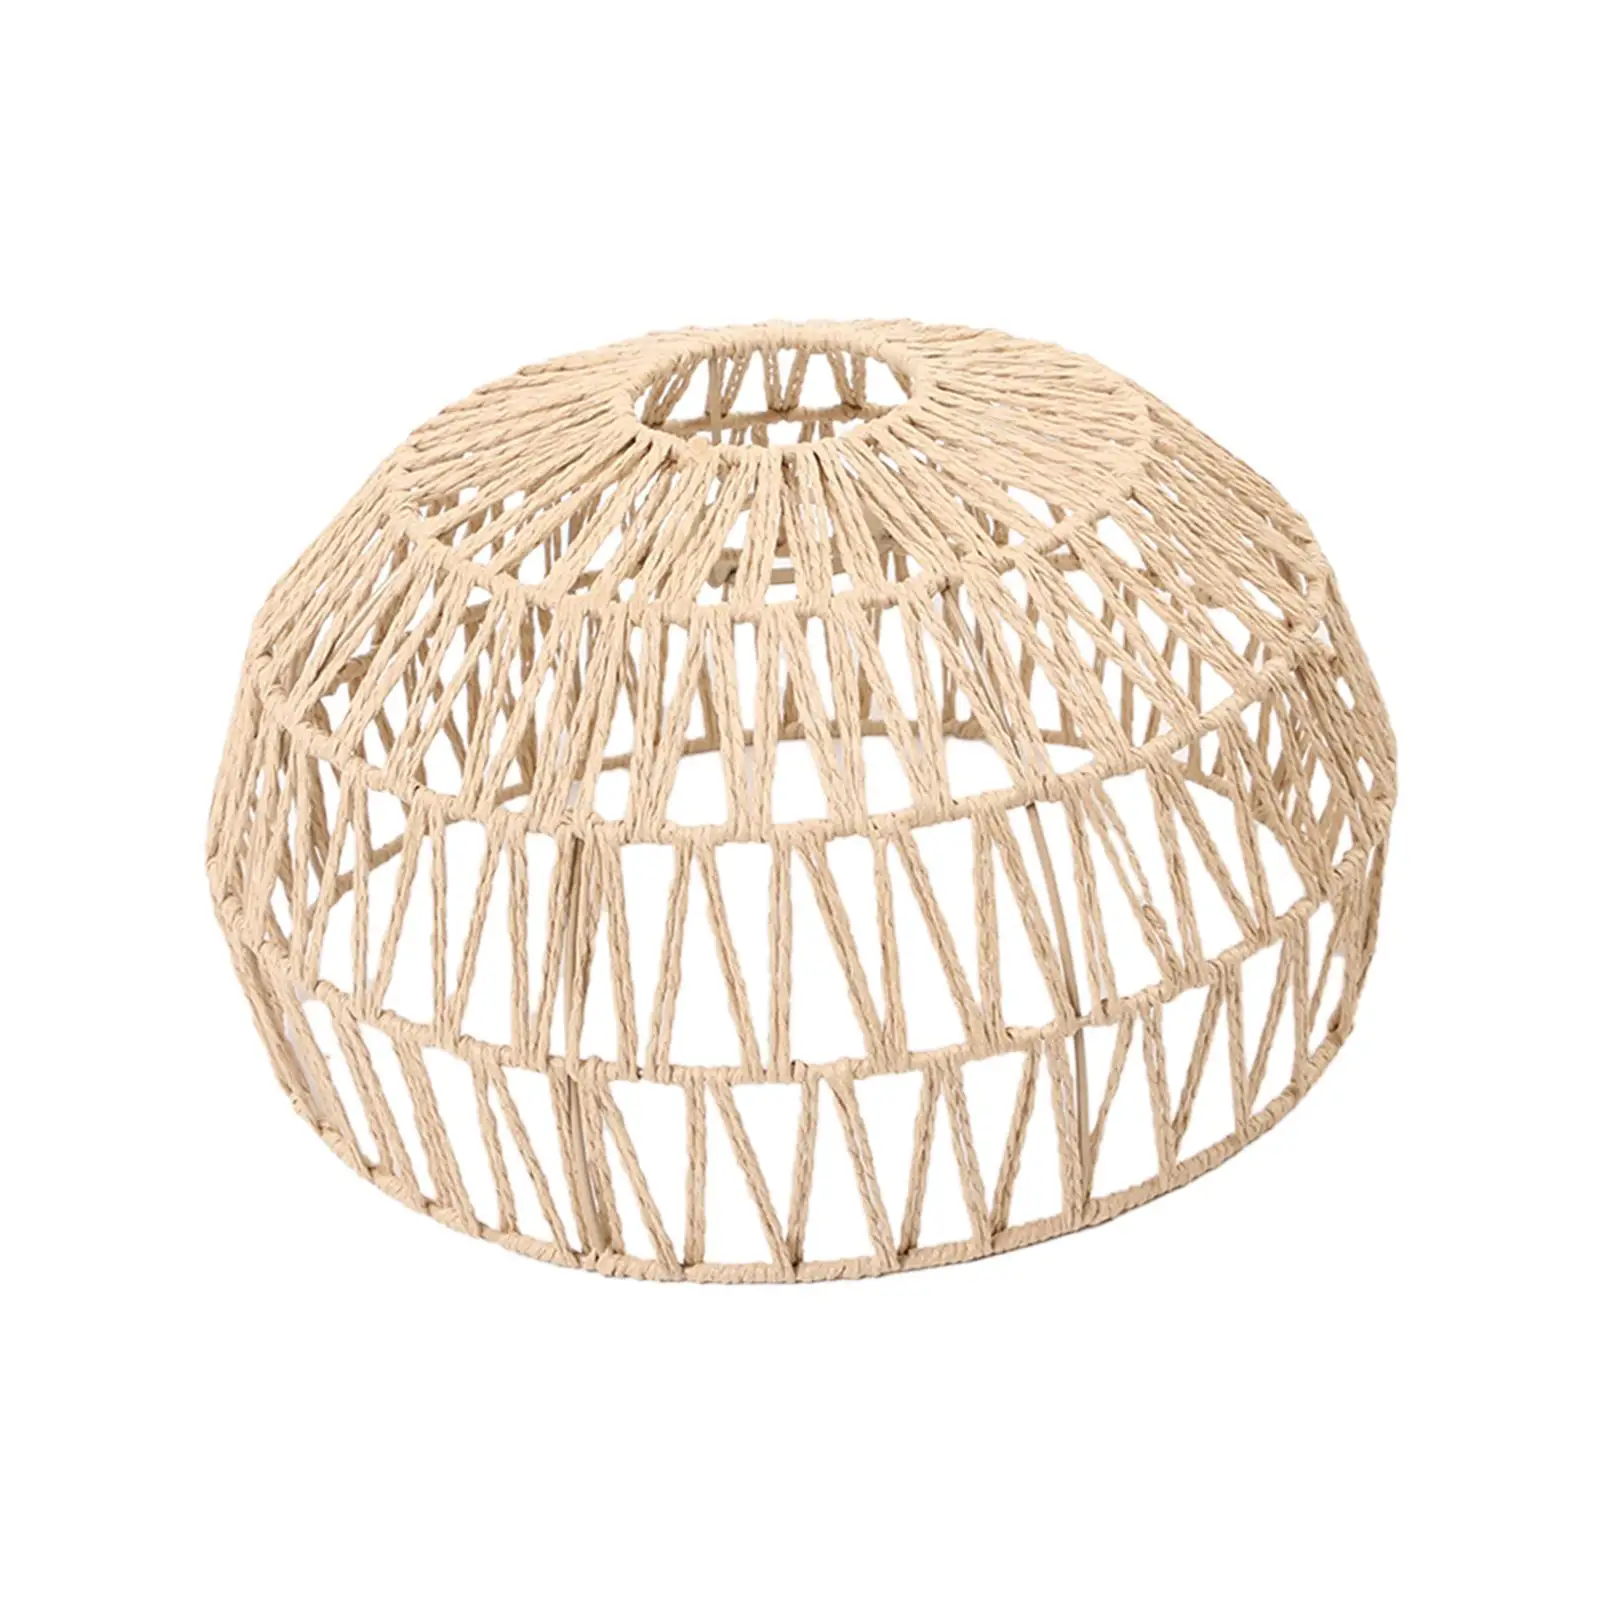 Retro Style Pendant Lamp Shade Weave Chandelier Paper Rope Woven Lampshade Lamp Cover for Bedroom, Kitchen Island